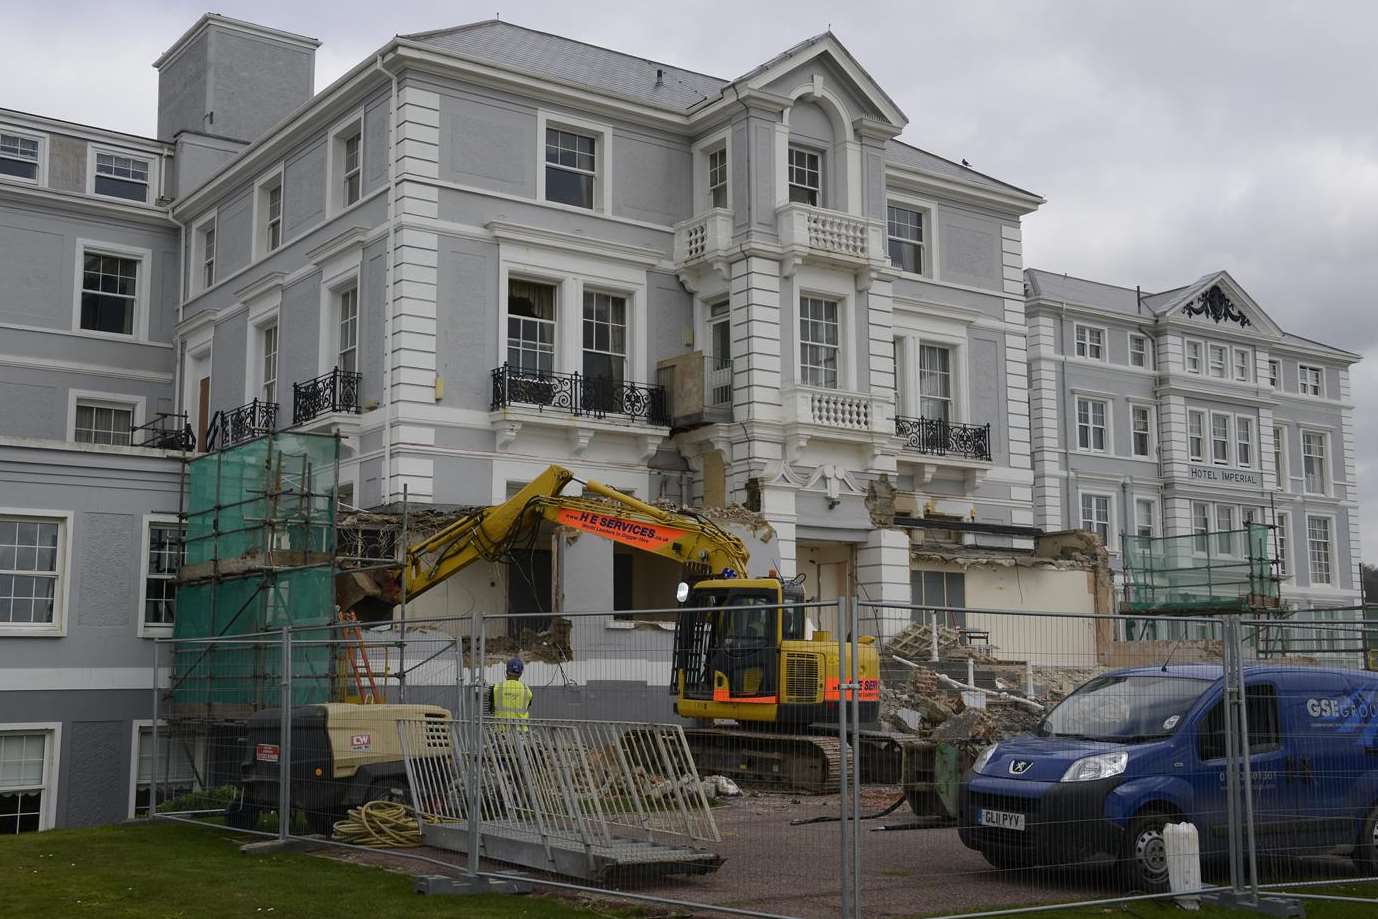 The Hythe Imperial Hotel is having its ballroom opened up to a seaview terrace